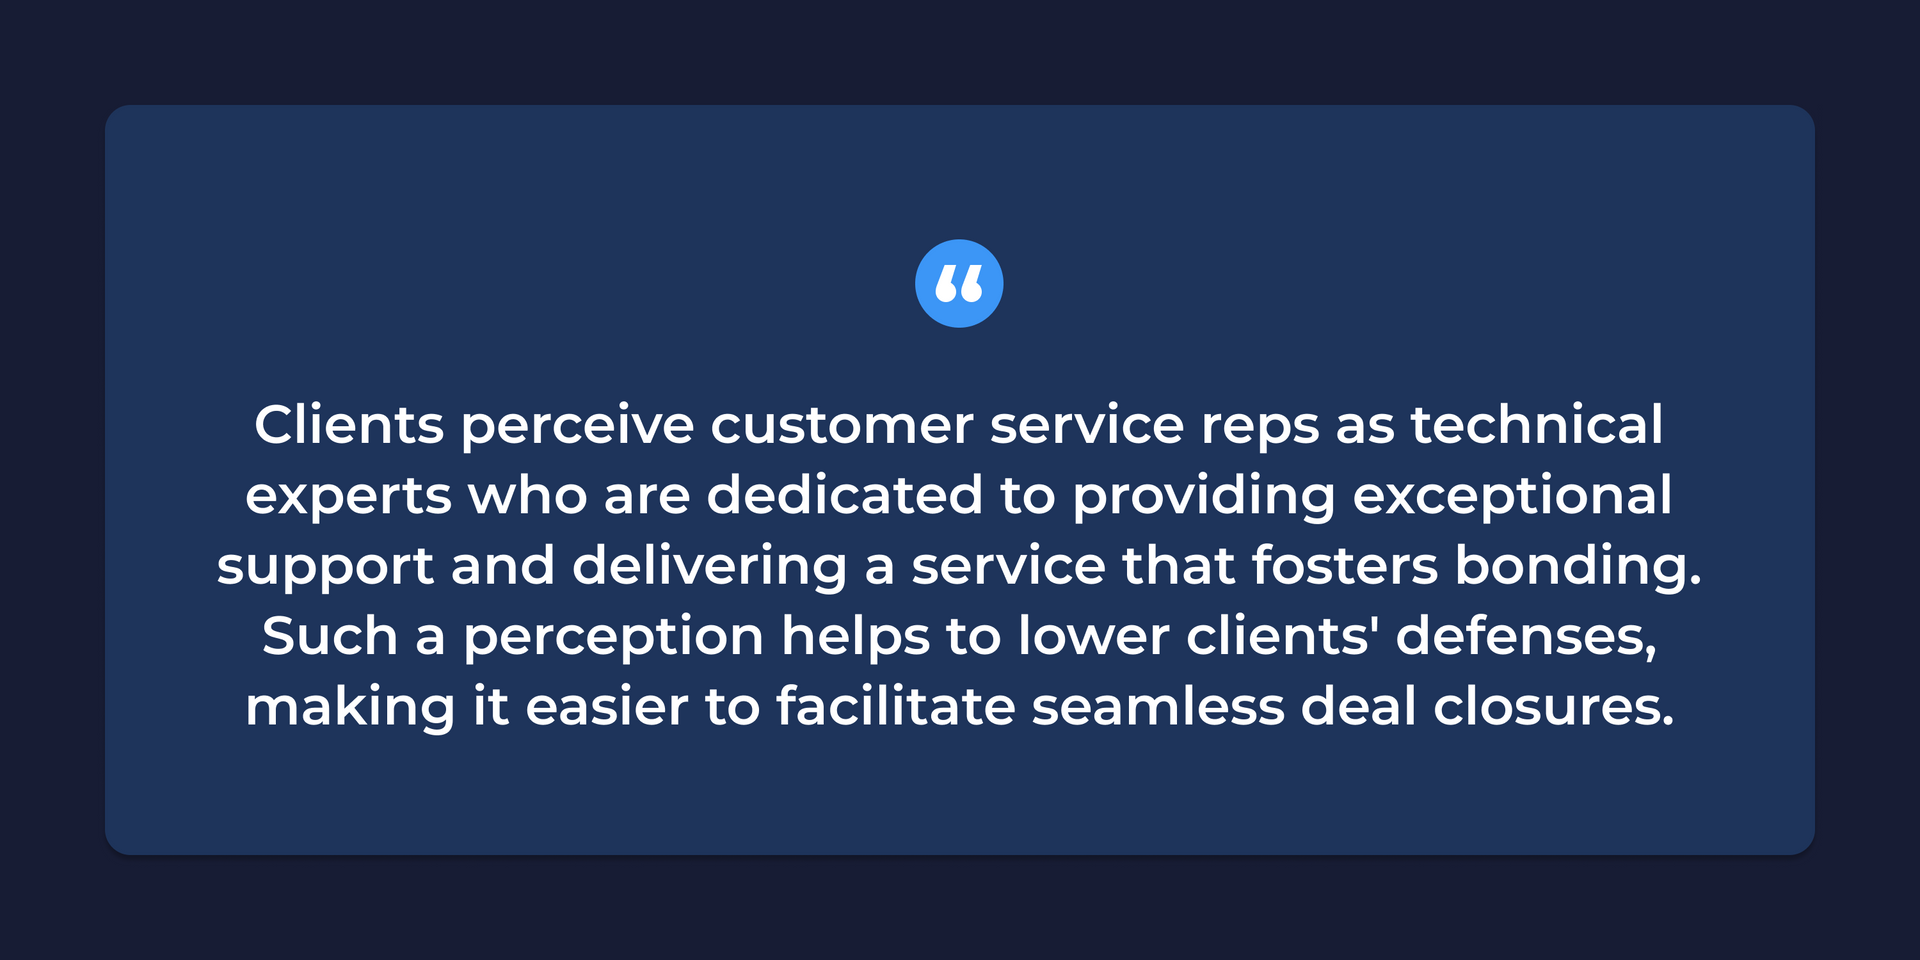 A quote about clients perceiving customer service reps as technical experts